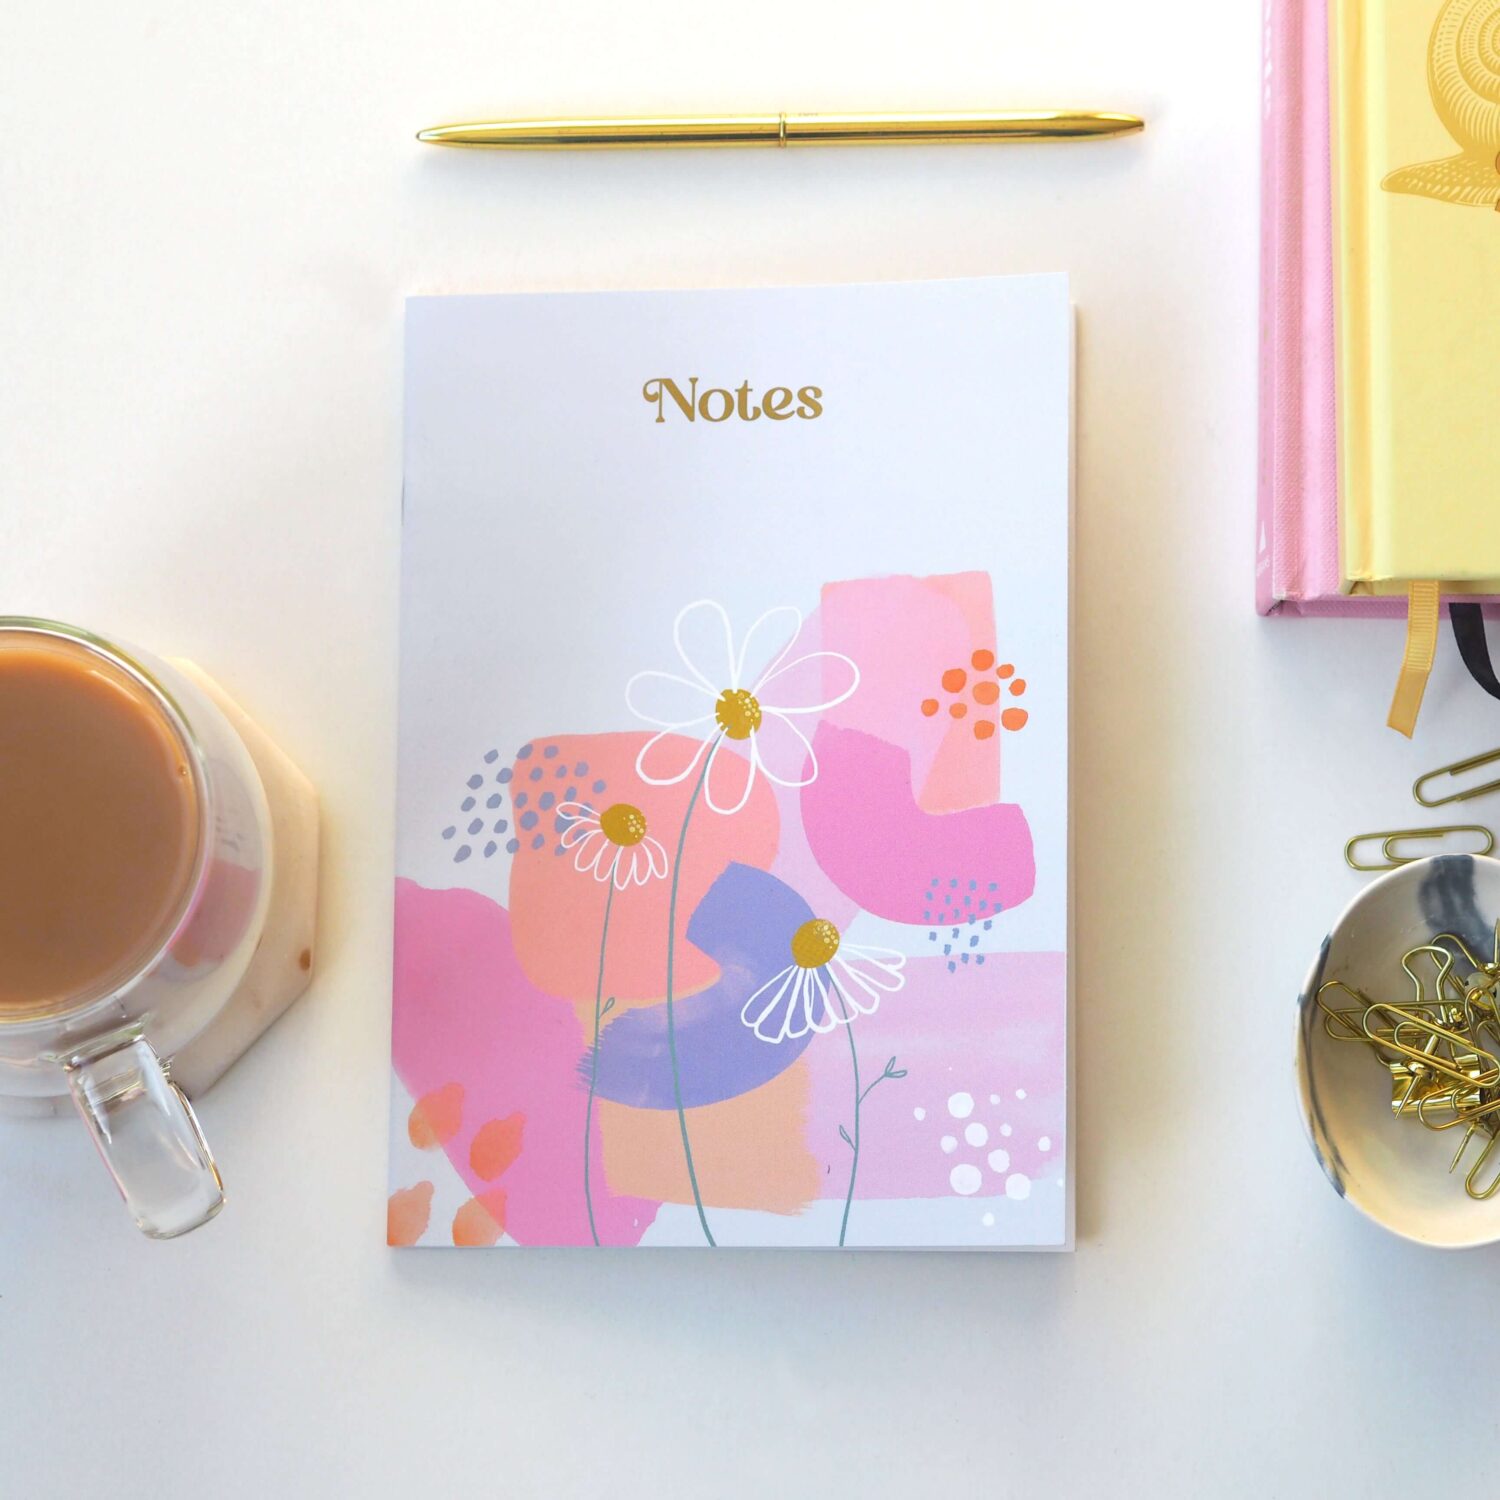 Daisy floral design notebook with gold detail